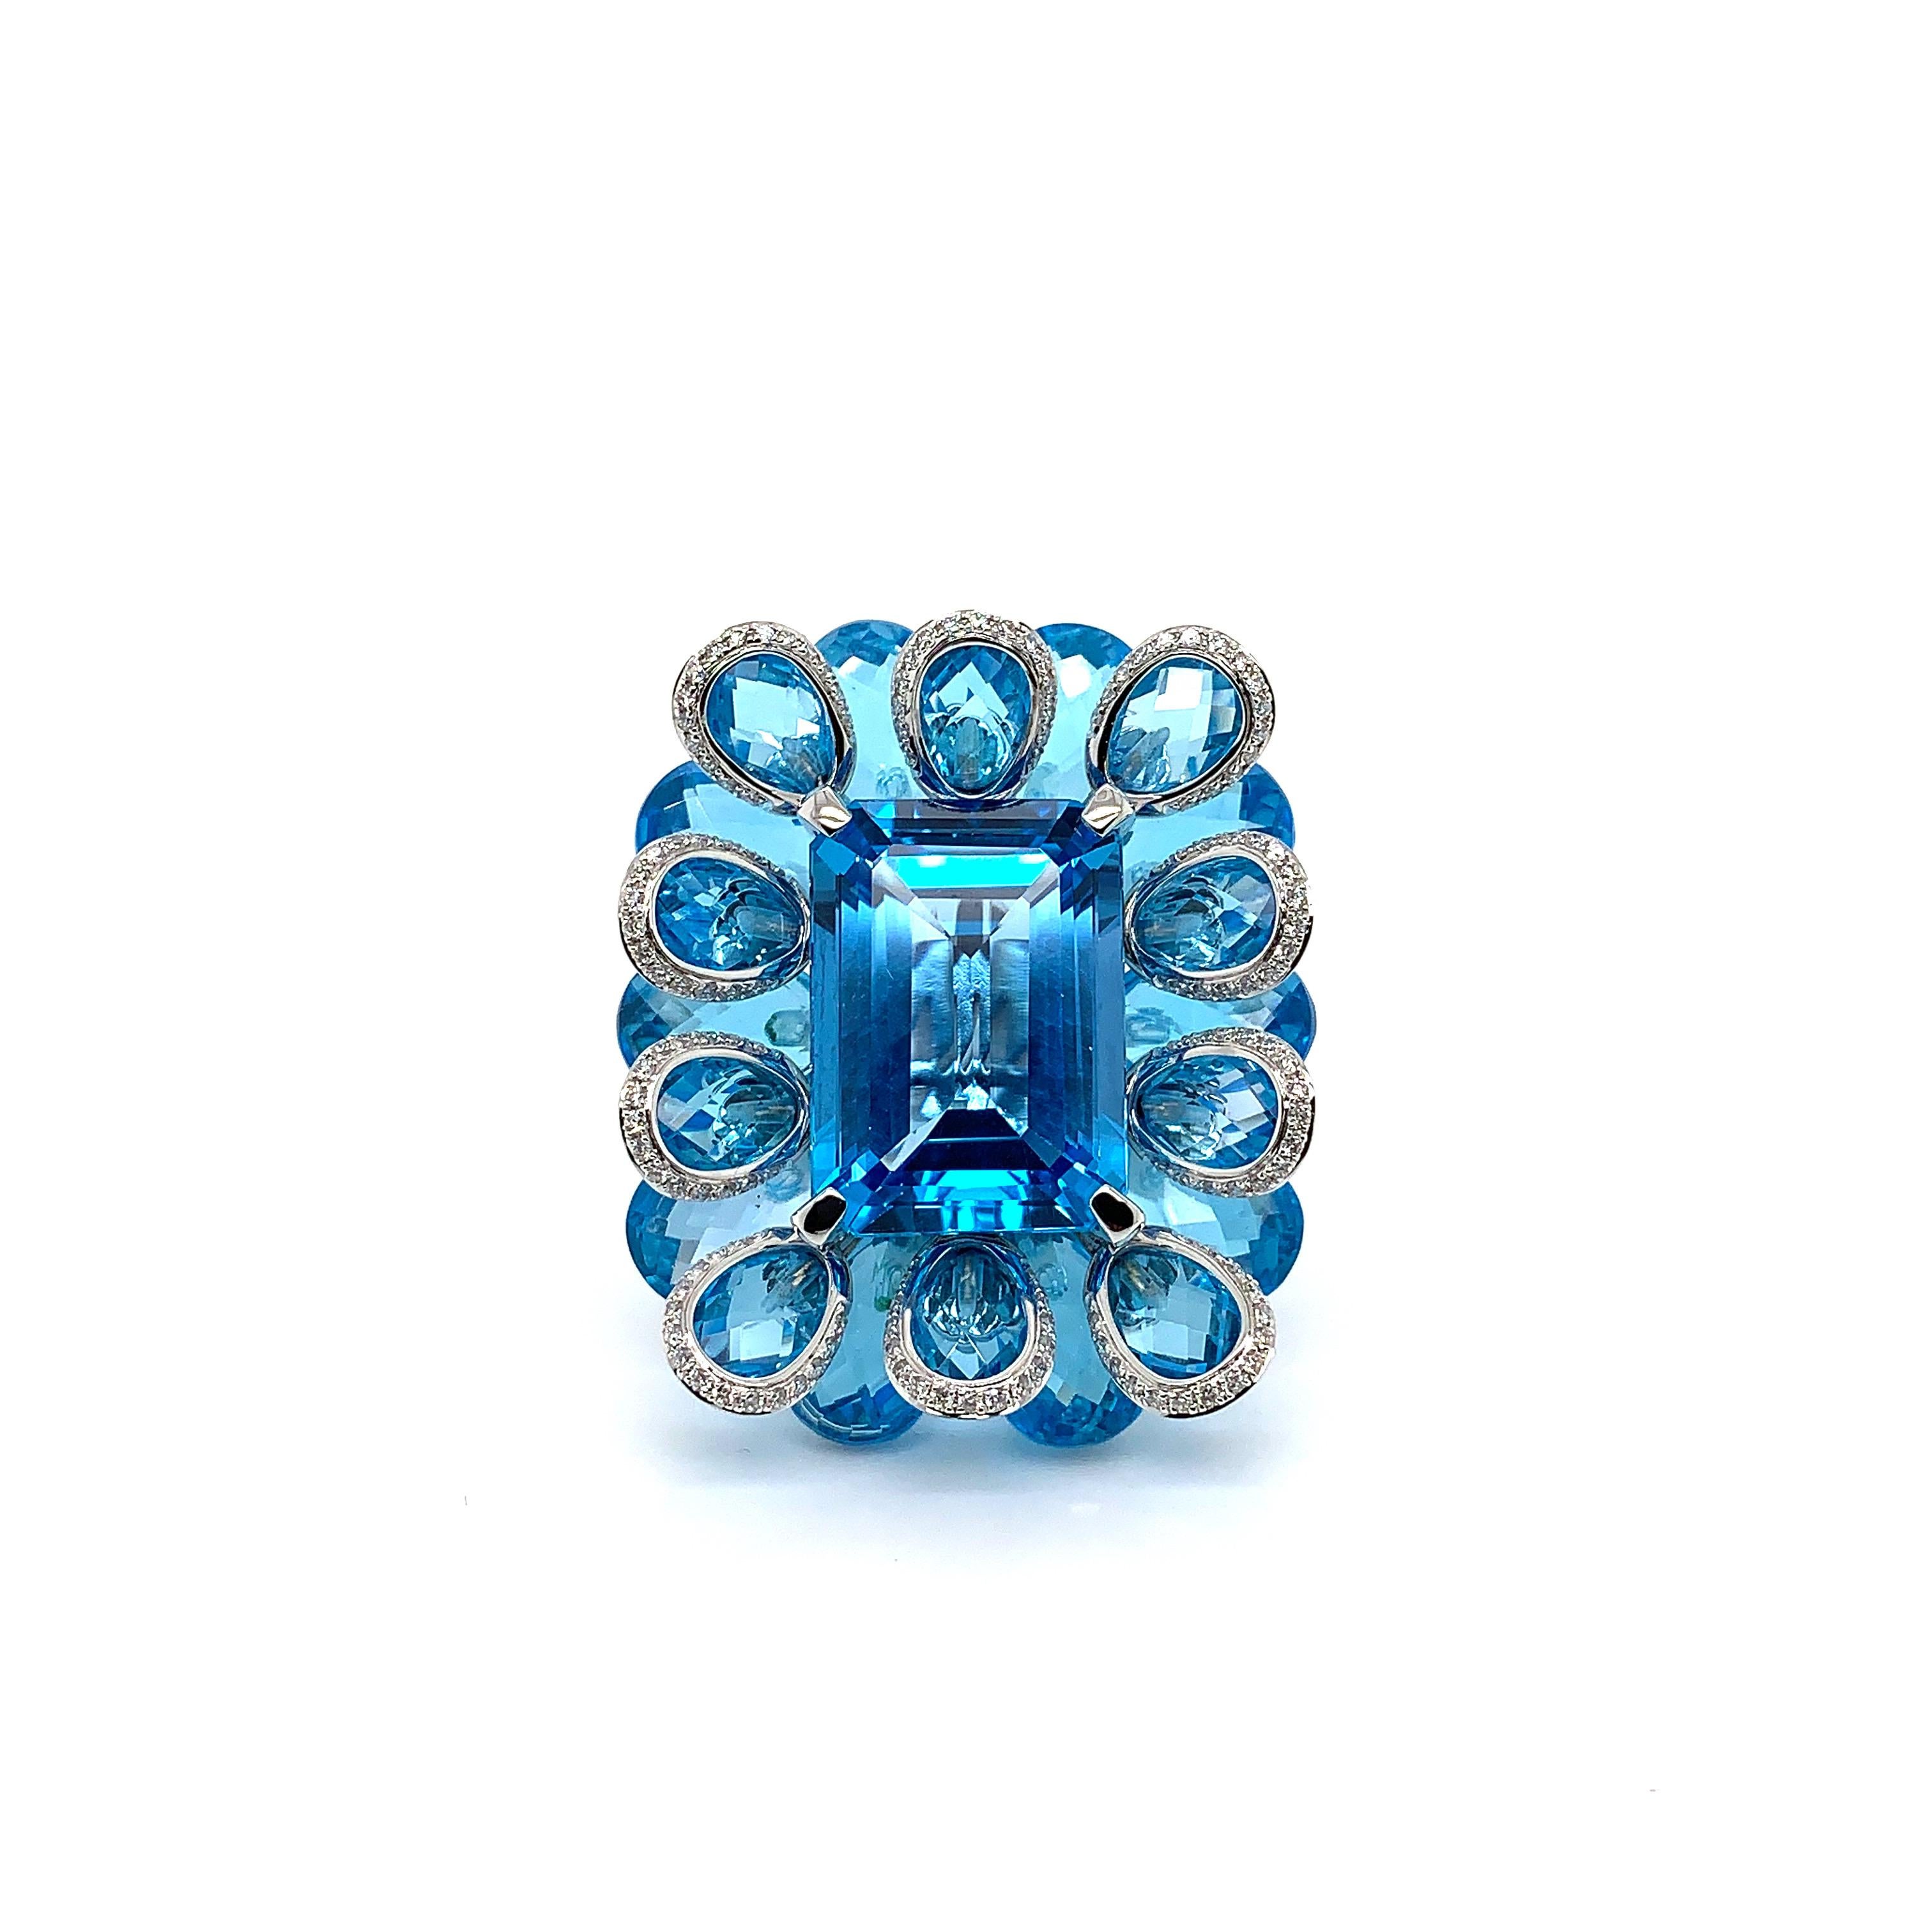 This ring features an exquisite 21.51 carat blue topaz as the center stone. This gorgeous gemstone is laid on top of a bed of luscious blue topaz briolettes to highlight the peaceful hue of the gems. The architectural layering of the floral blue